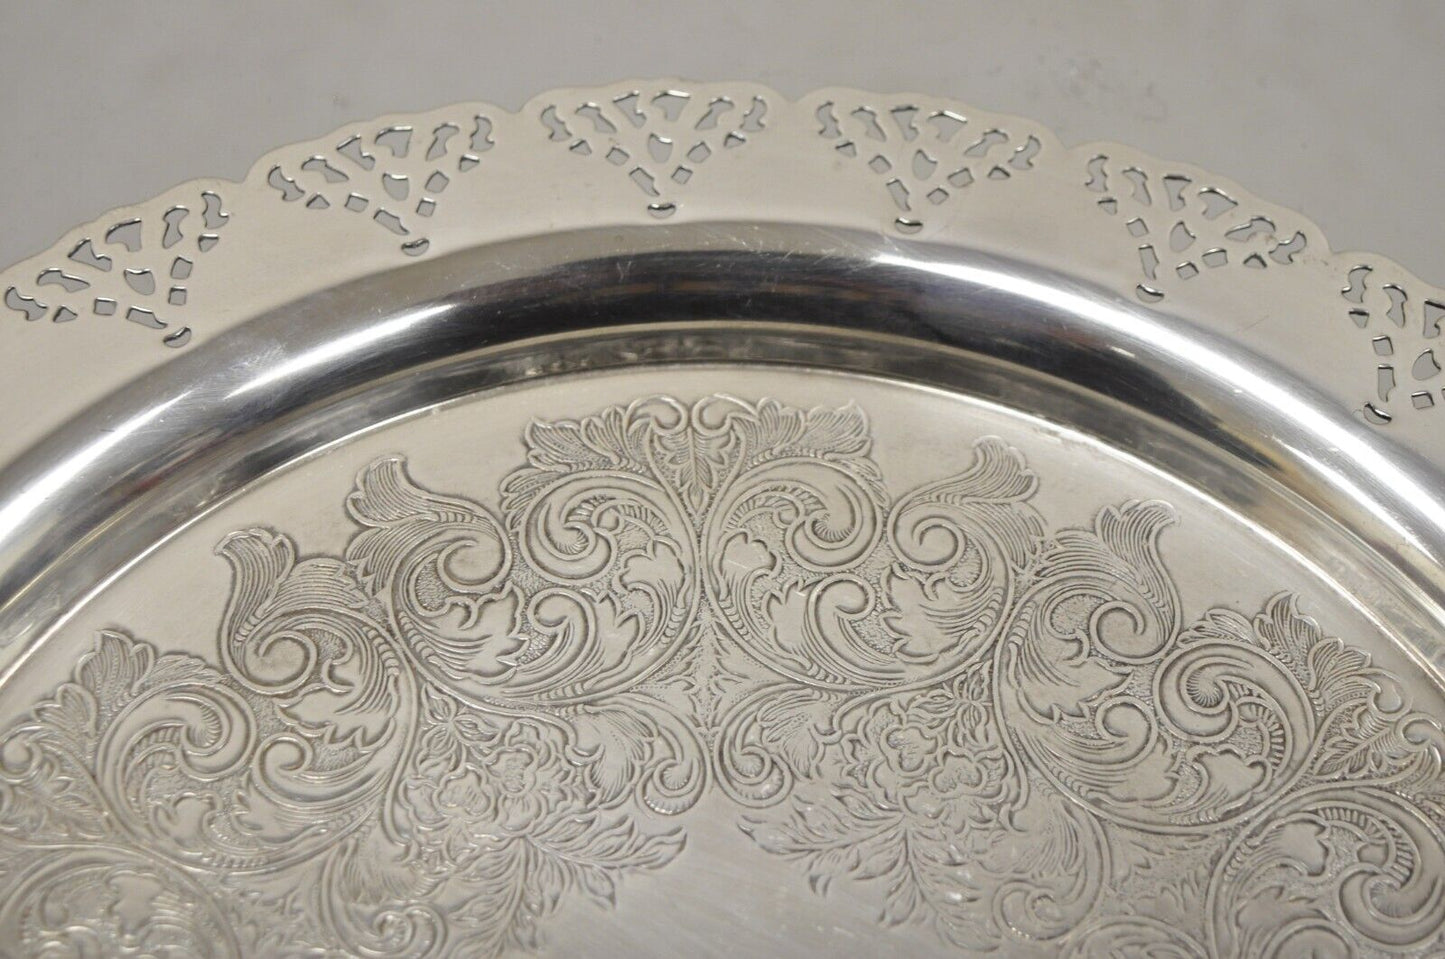 Vintage Home Decorators Inc Silver Plated Pierced Gallery Round Serving Tray